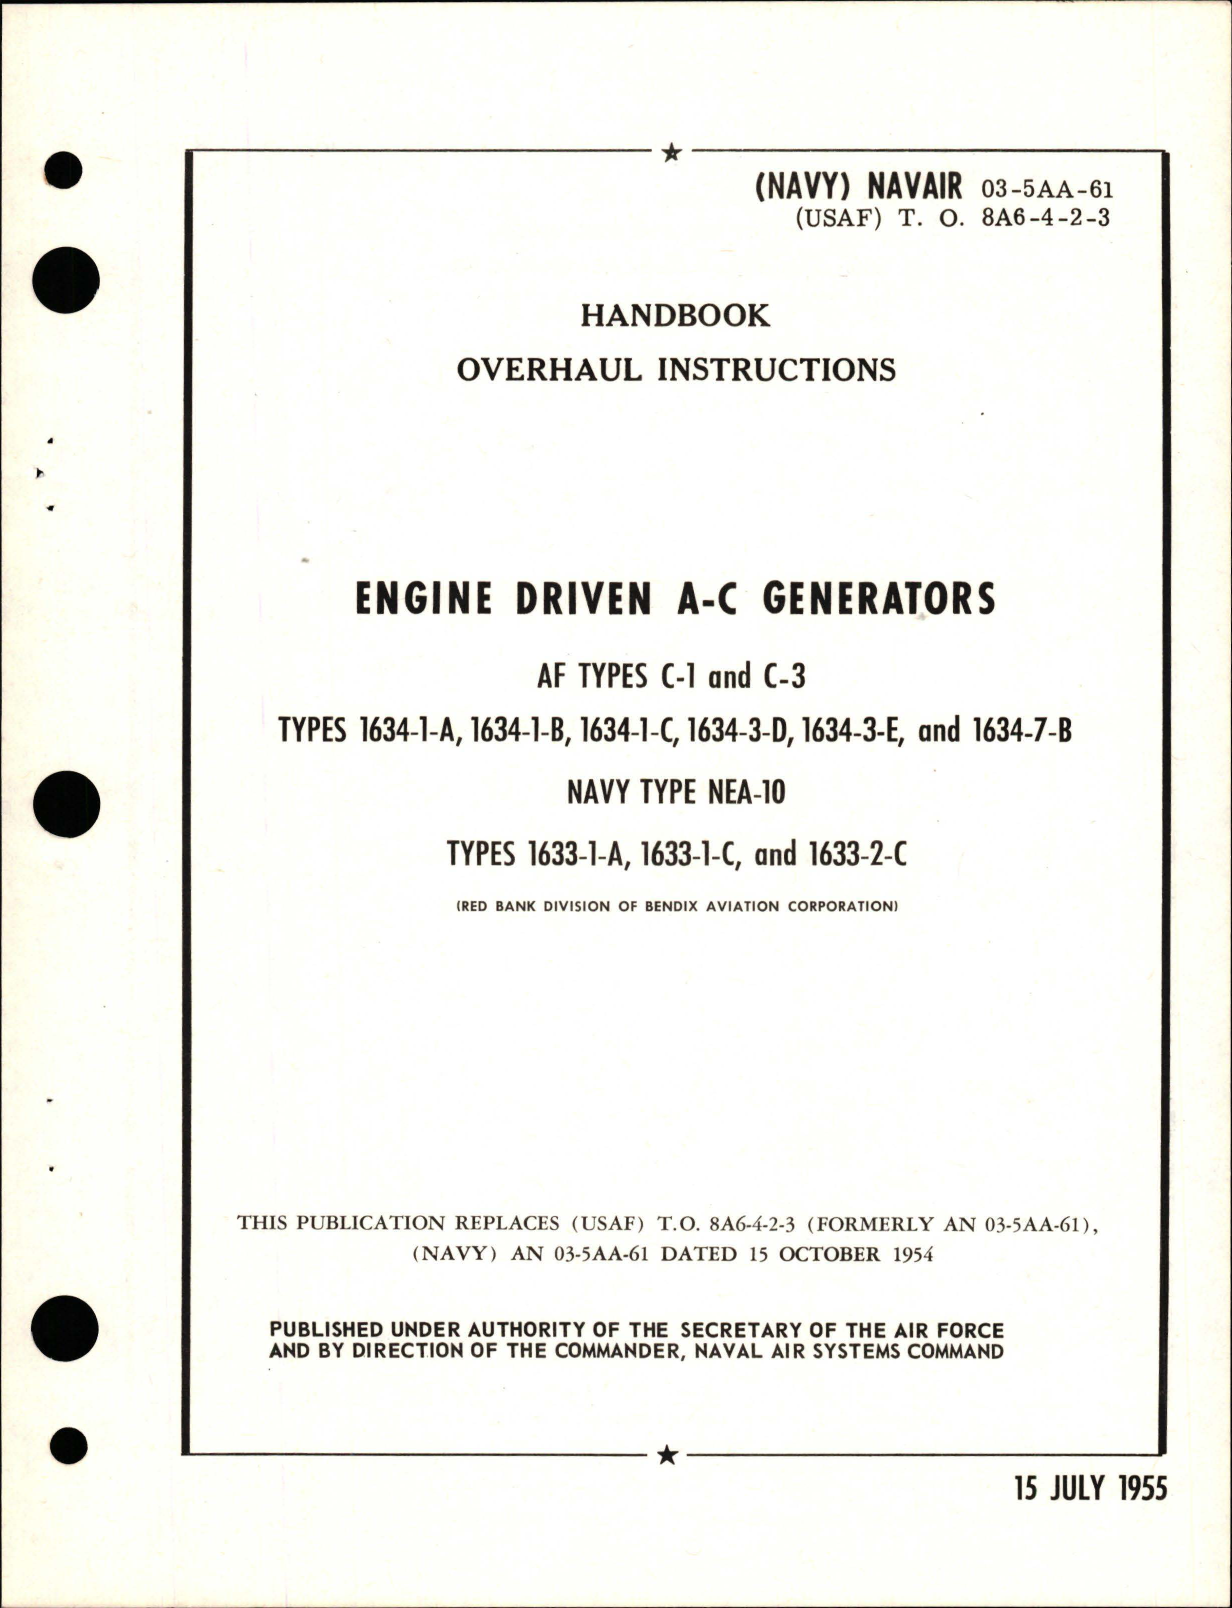 Sample page 1 from AirCorps Library document: Overhaul Instructions for Engine Driven A-C Generators